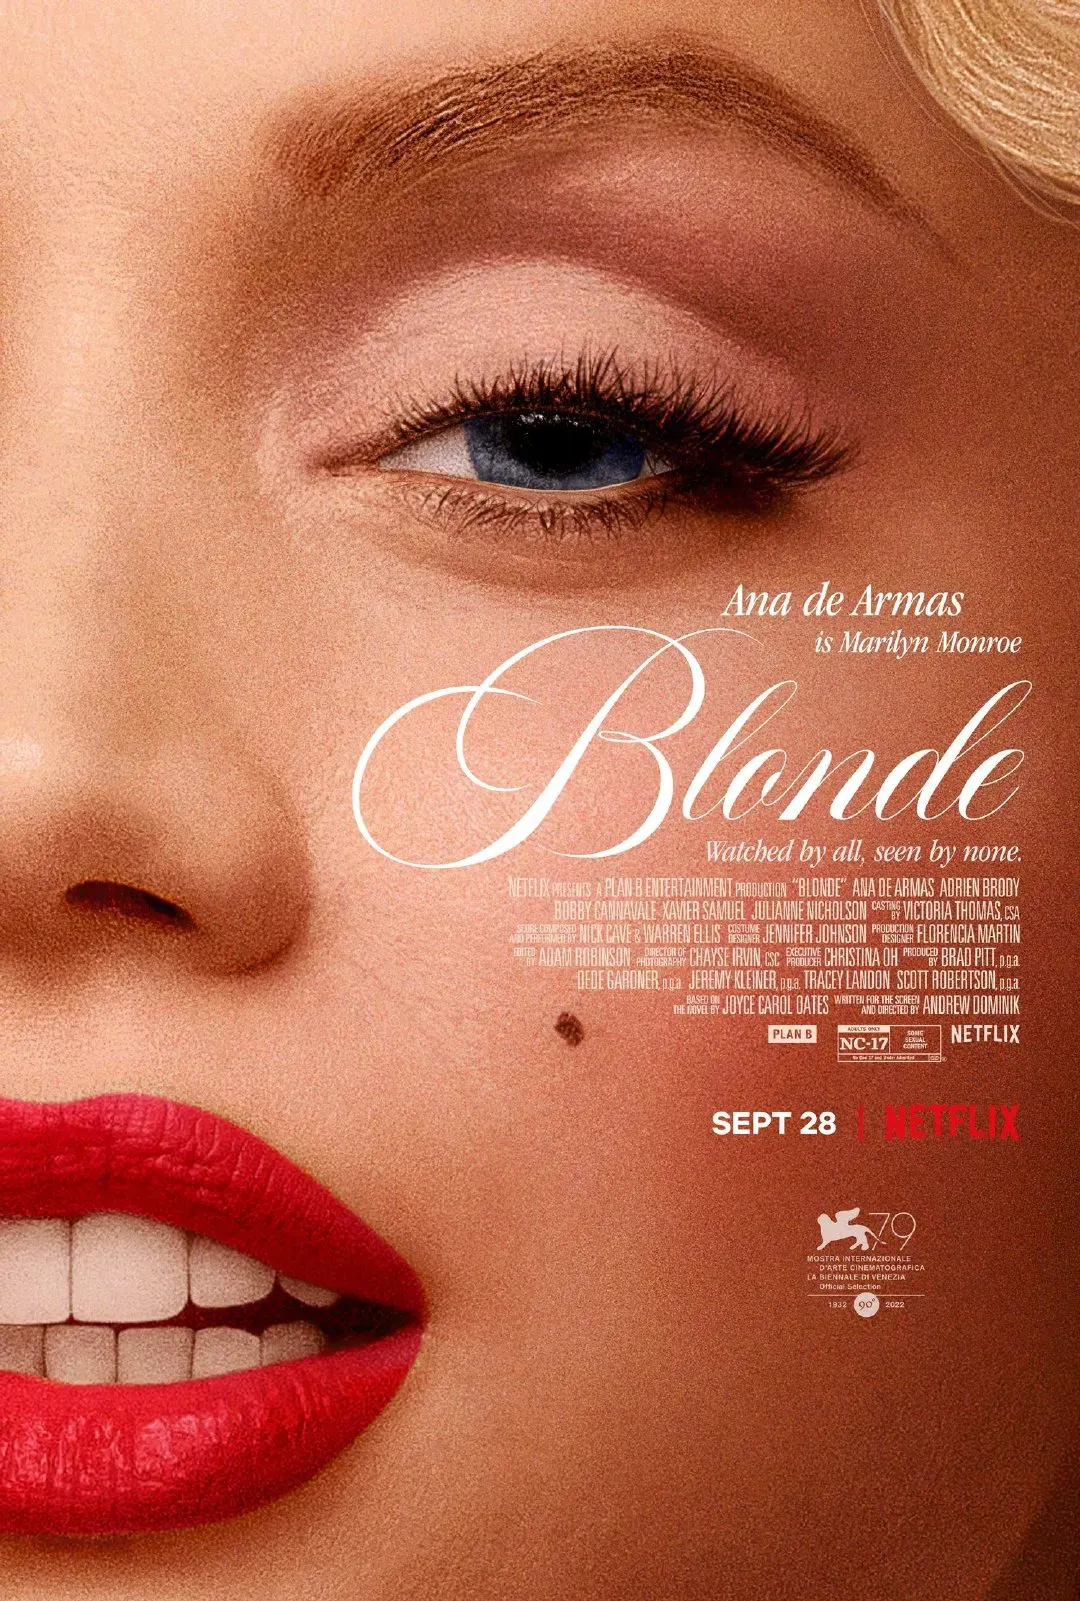 Marilyn Monroe Biopic 'Blonde' Releases New Trailer and Poster, Shortlisted for 2022 Venice International Film Festival Main Competition | FMV6